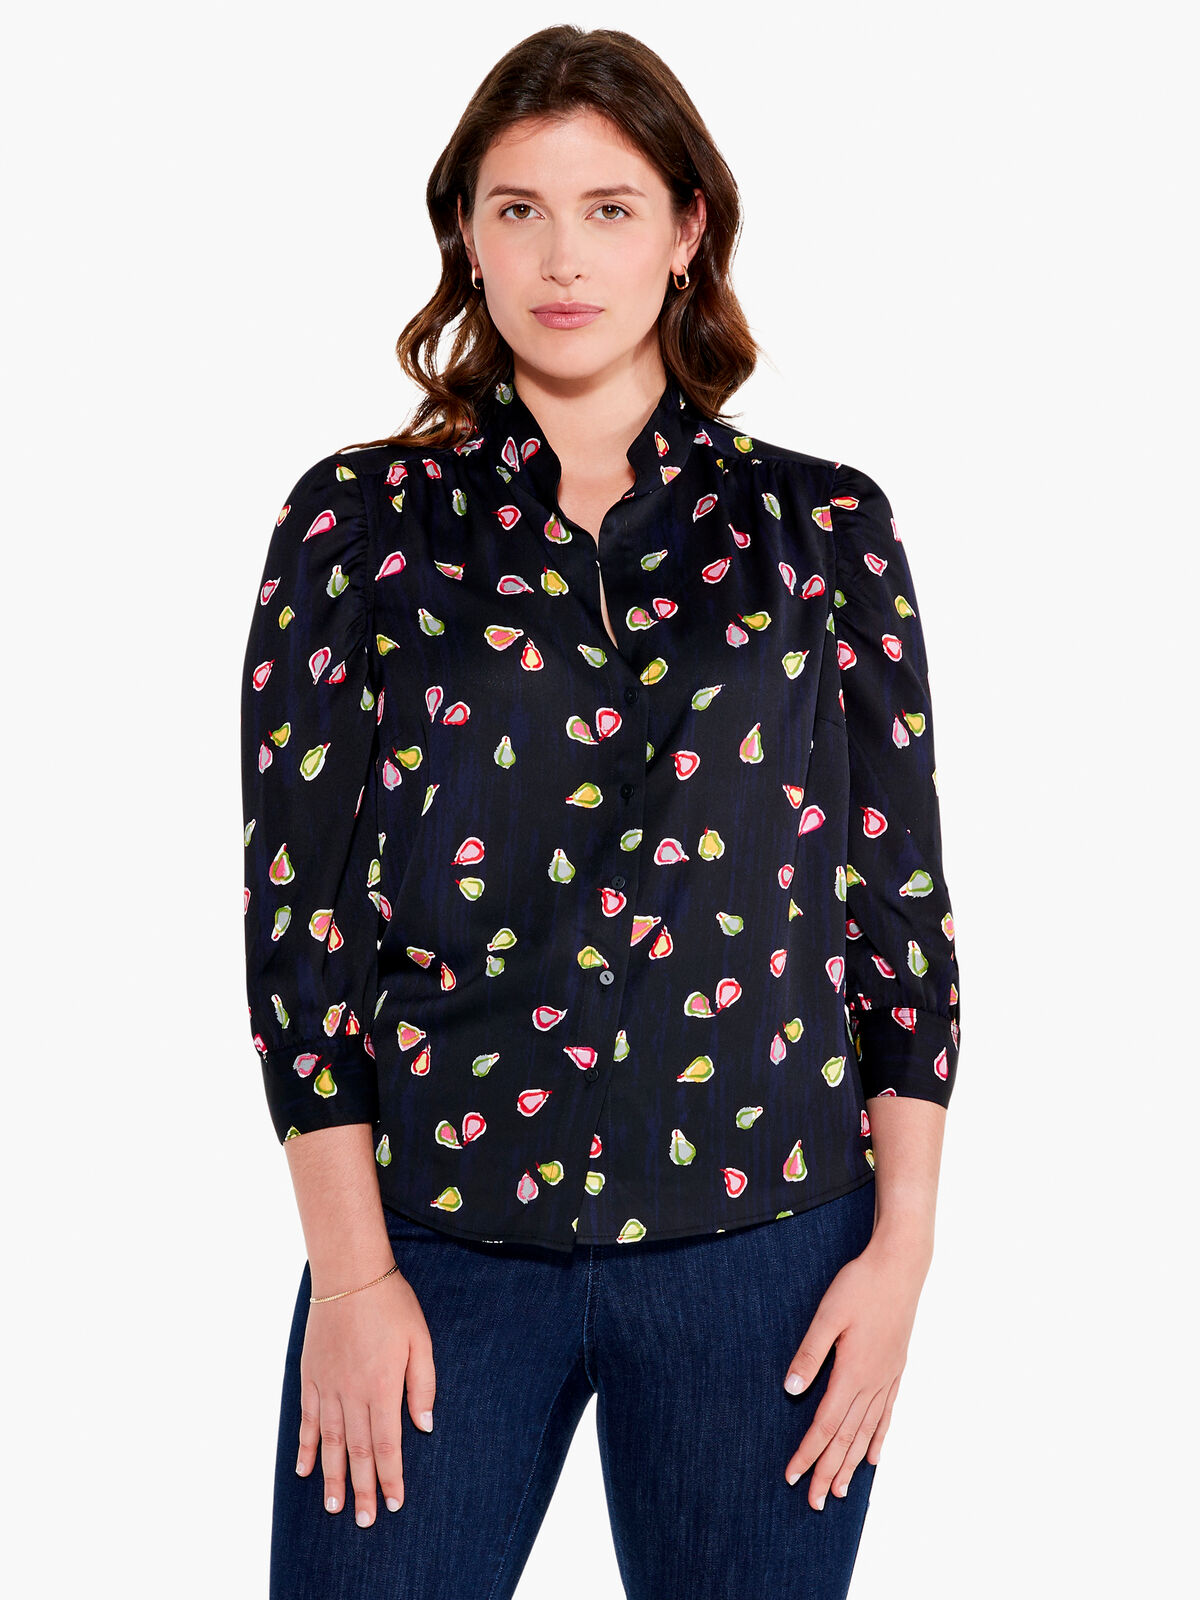 Party Pears Top